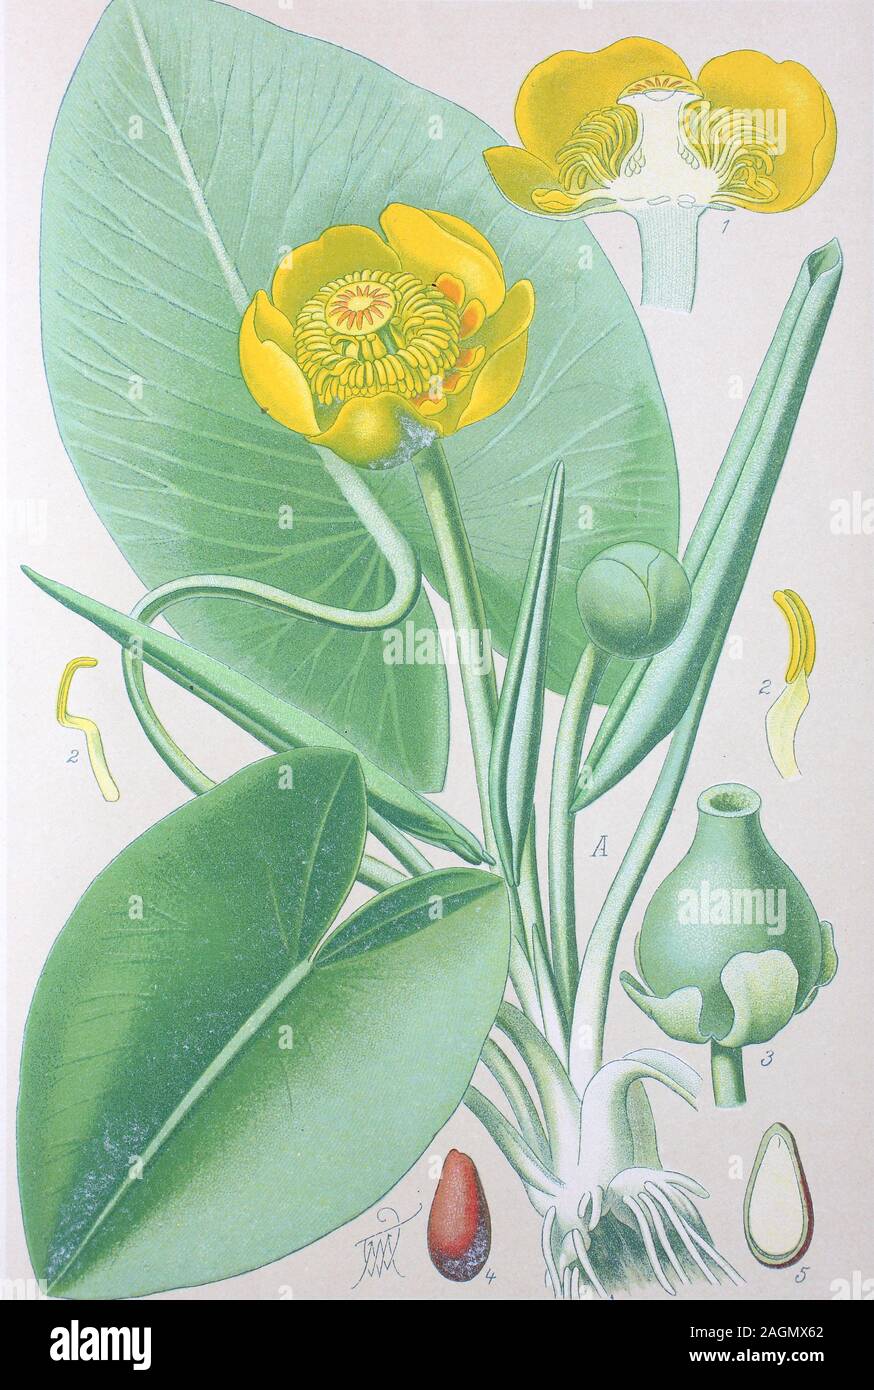 Digital improved high quality reproduction: Nuphar lutea, the yellow water-lily, or brandy-bottle, is an aquatic plant of the family Nymphaeaceae  /  Gelbe Teichrose, Gelbe Teichmummel, Mummel, Teichmummel oder Teichkandel, Pflanzenart aus der Familie der Seerosengewächse Stock Photo